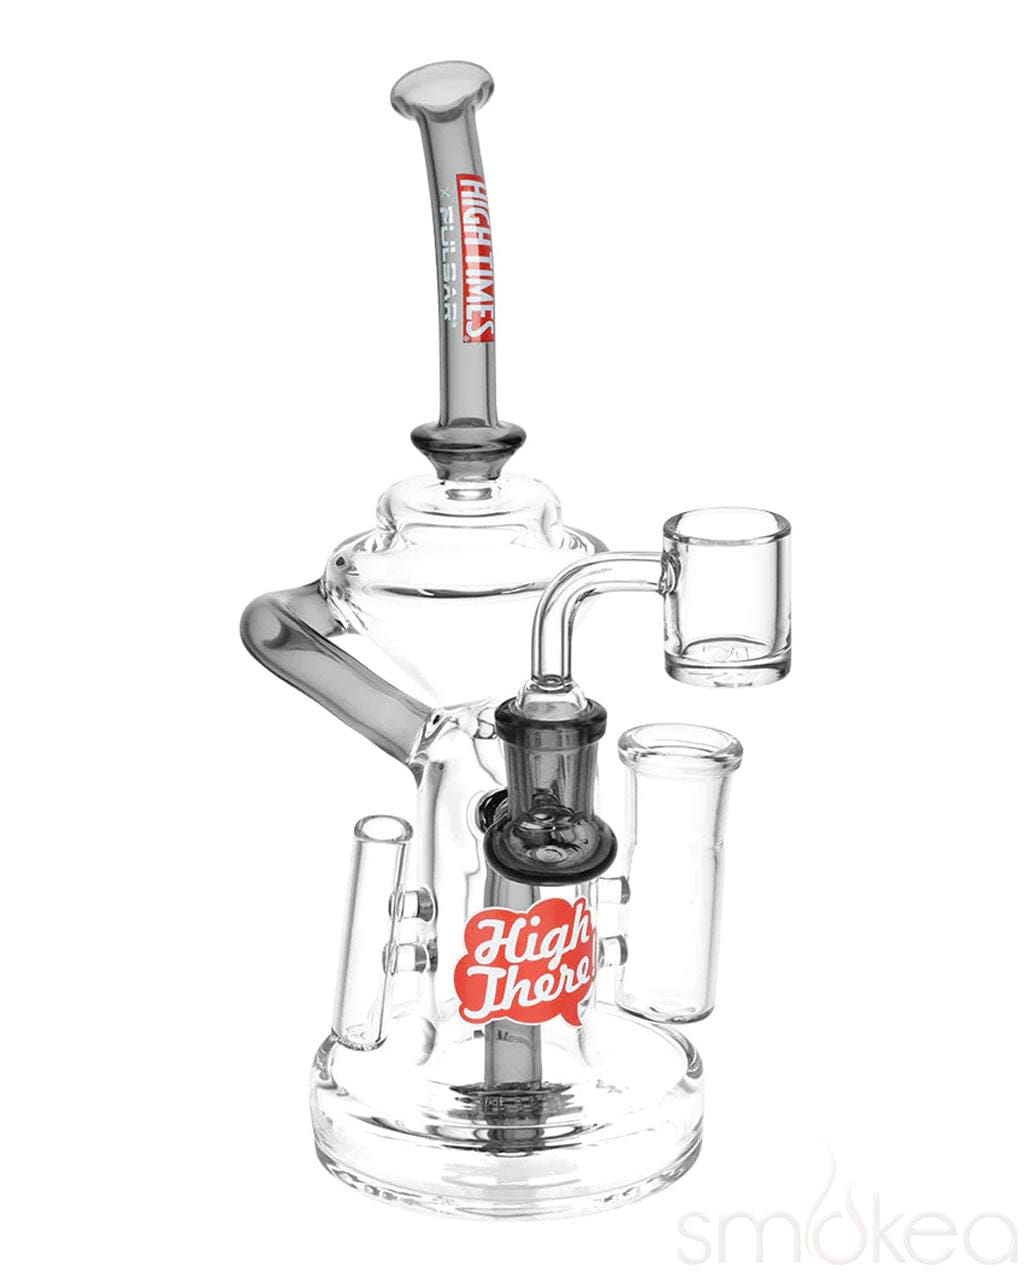 High Times x Pulsar All in One Recycler Dab Rig